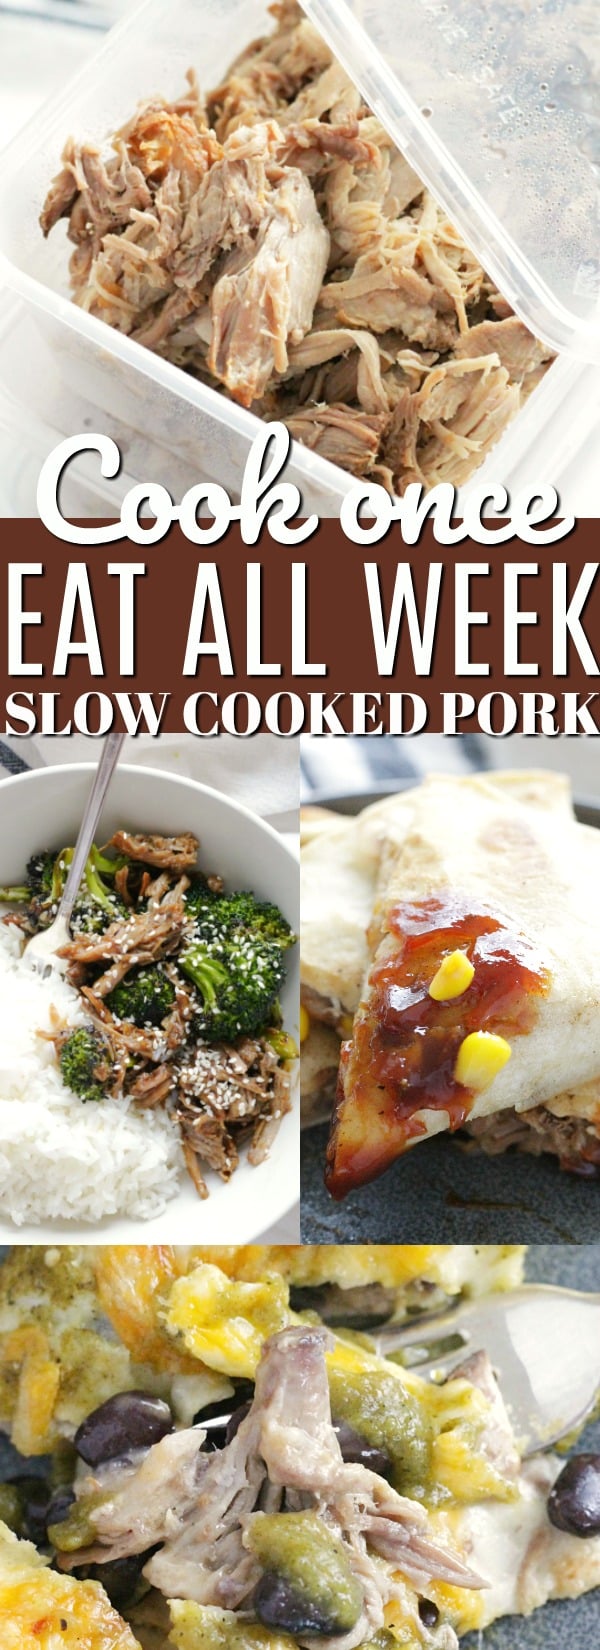 Cook One Eat All Week with Slow Cooker Pork | Foodtastic Mom #ad #ohpork